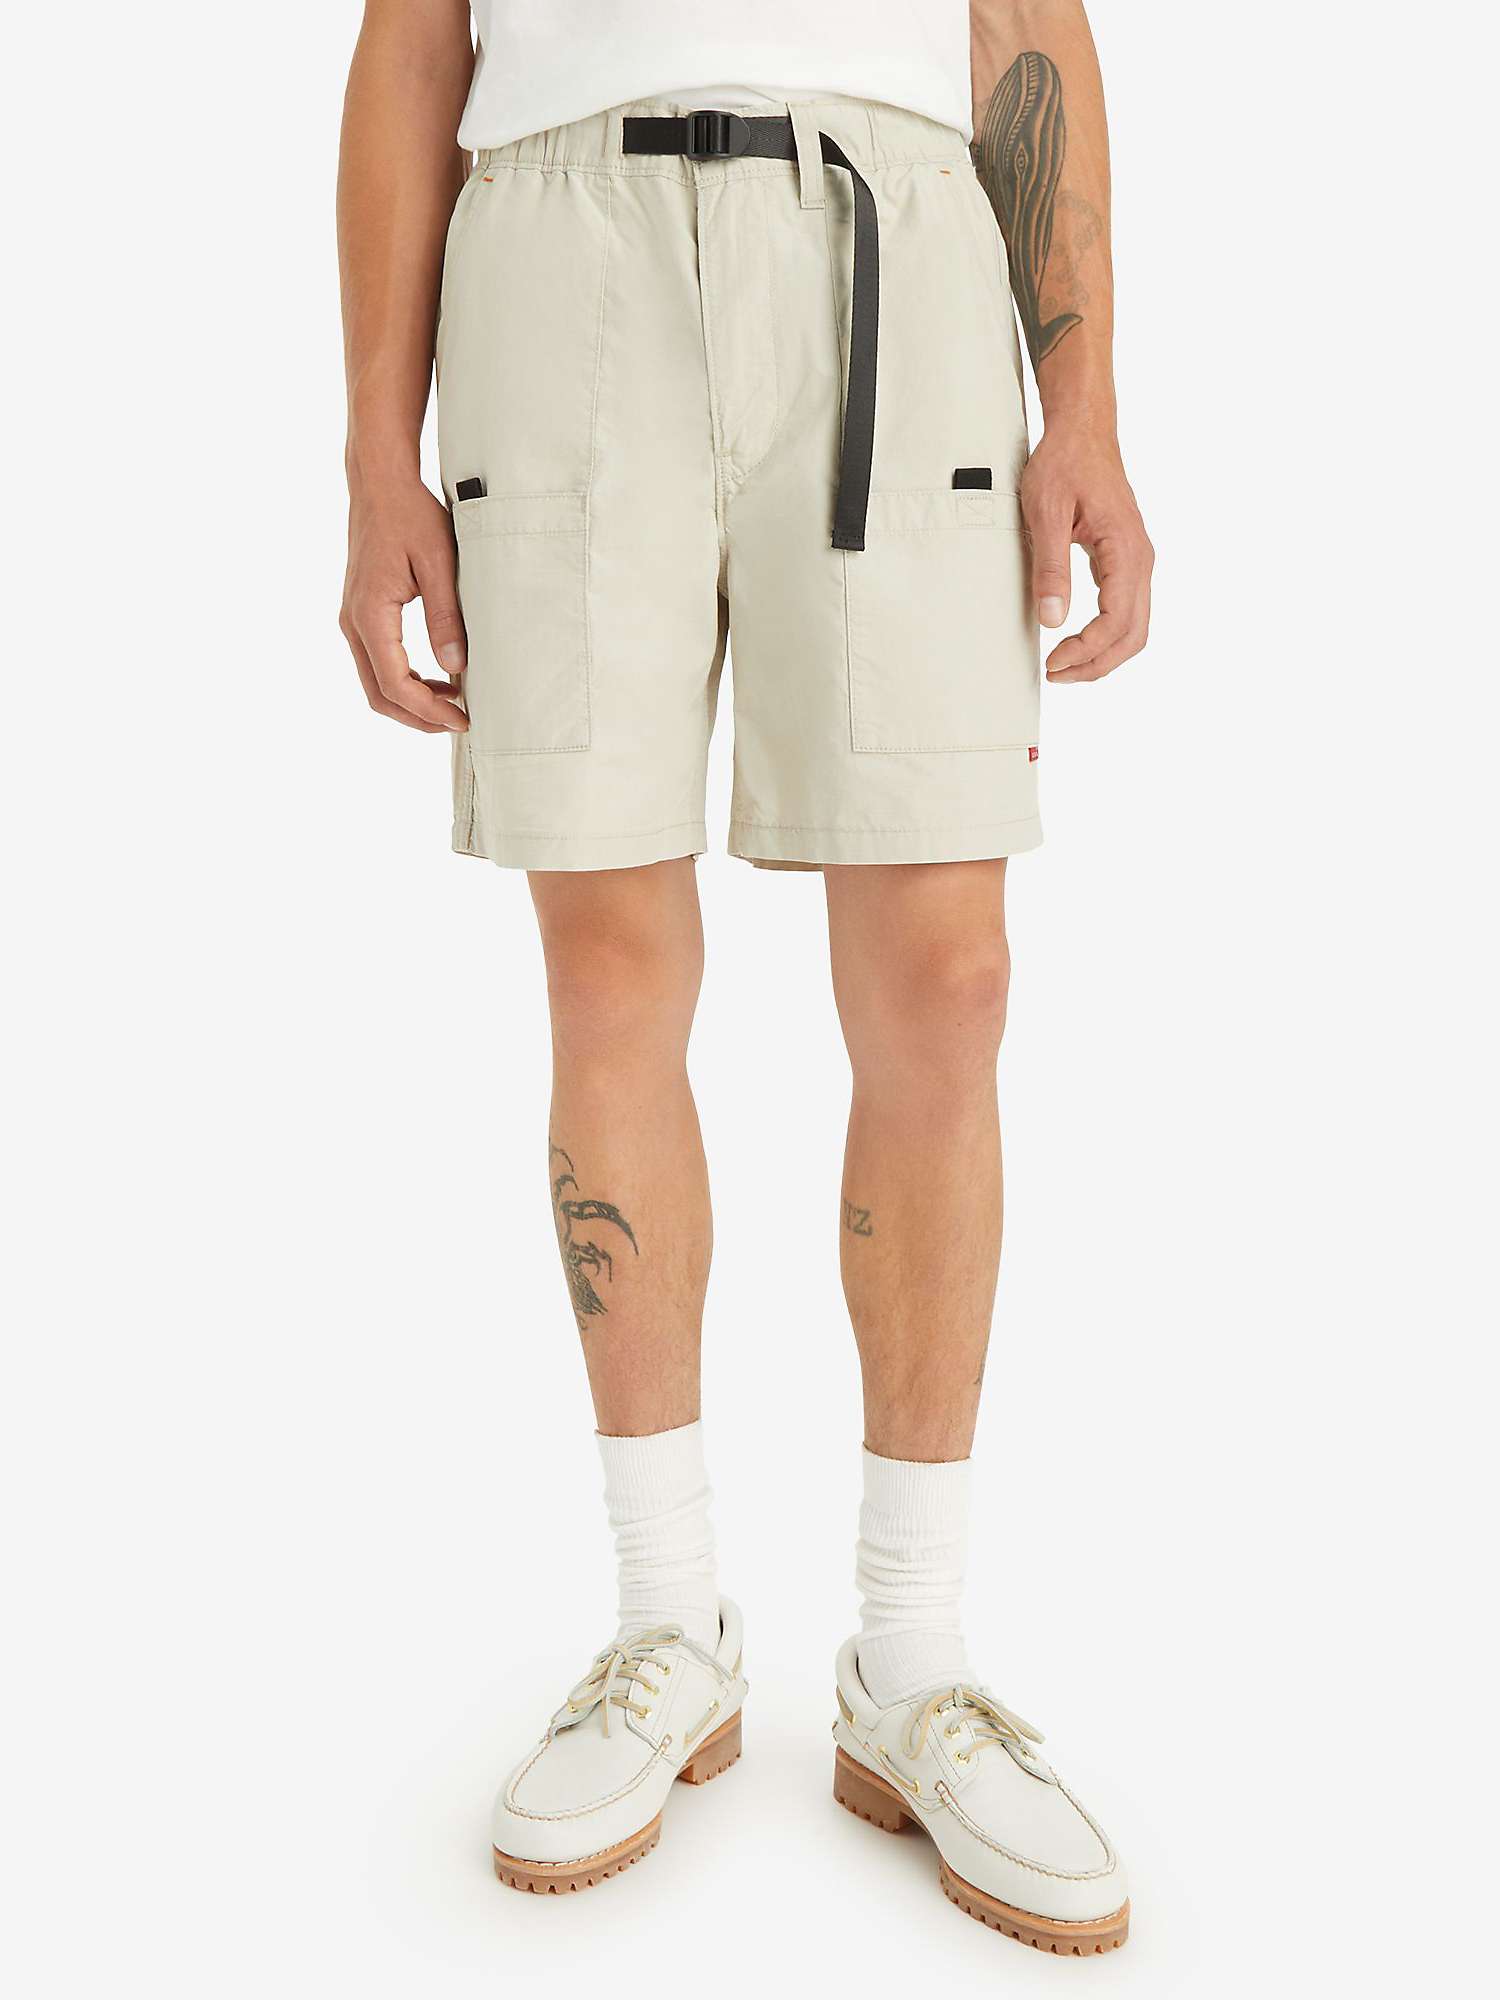 Buy Levi's Utility Belted Shorts, Feather Gray Online at johnlewis.com